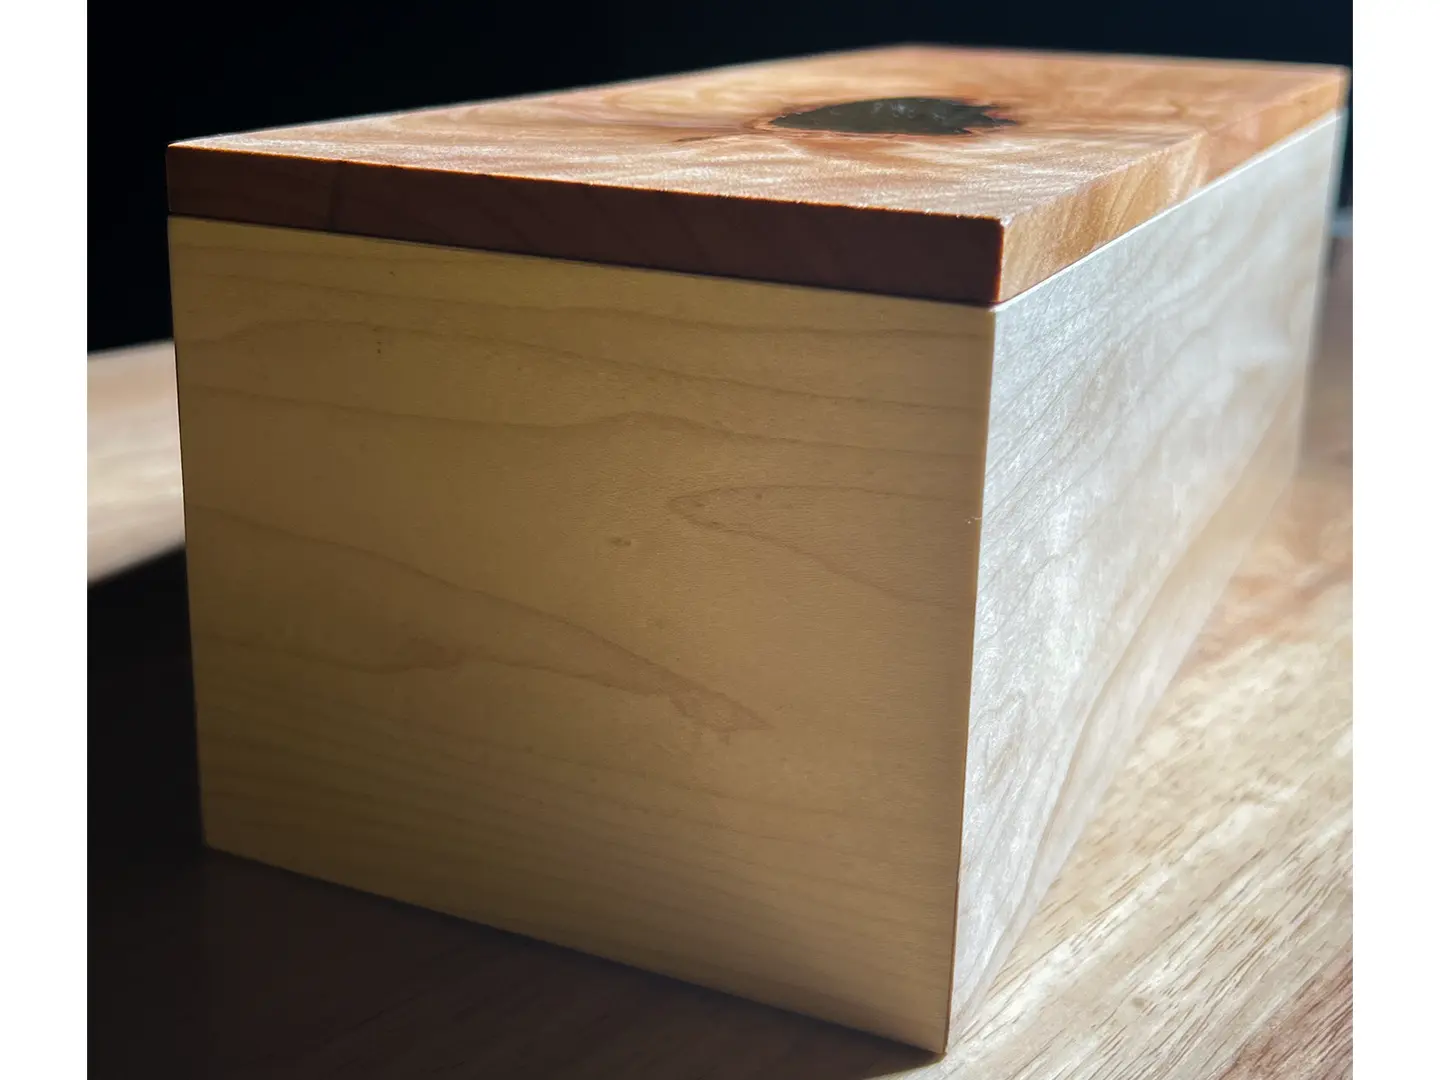 A small wooden box made from hard maple and a cherry top